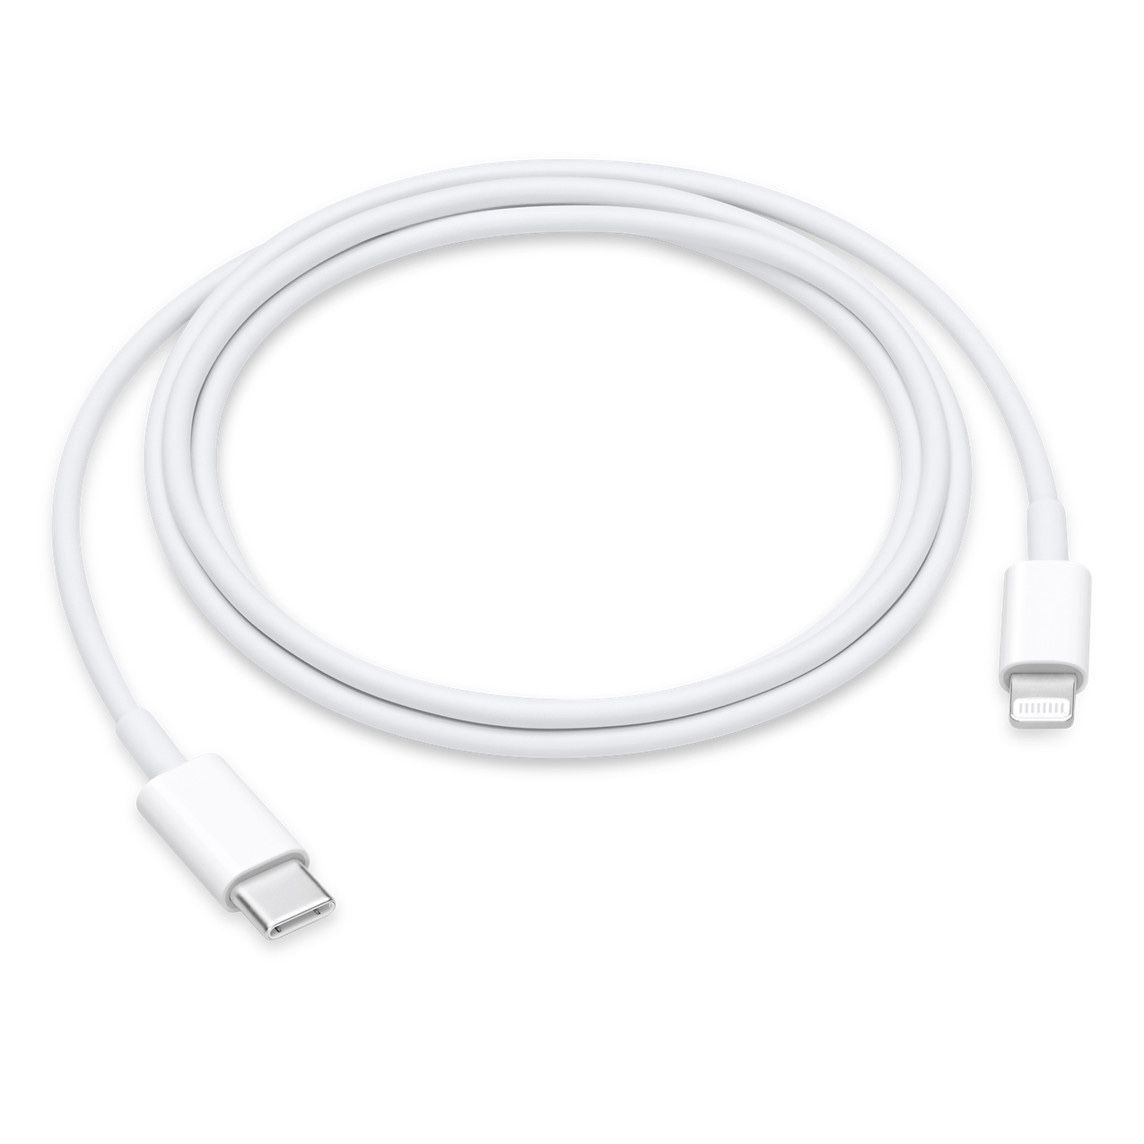  Apple iPhone Charging Cables 3ft Long 5 Pack  (USB C To Lightning Cables)